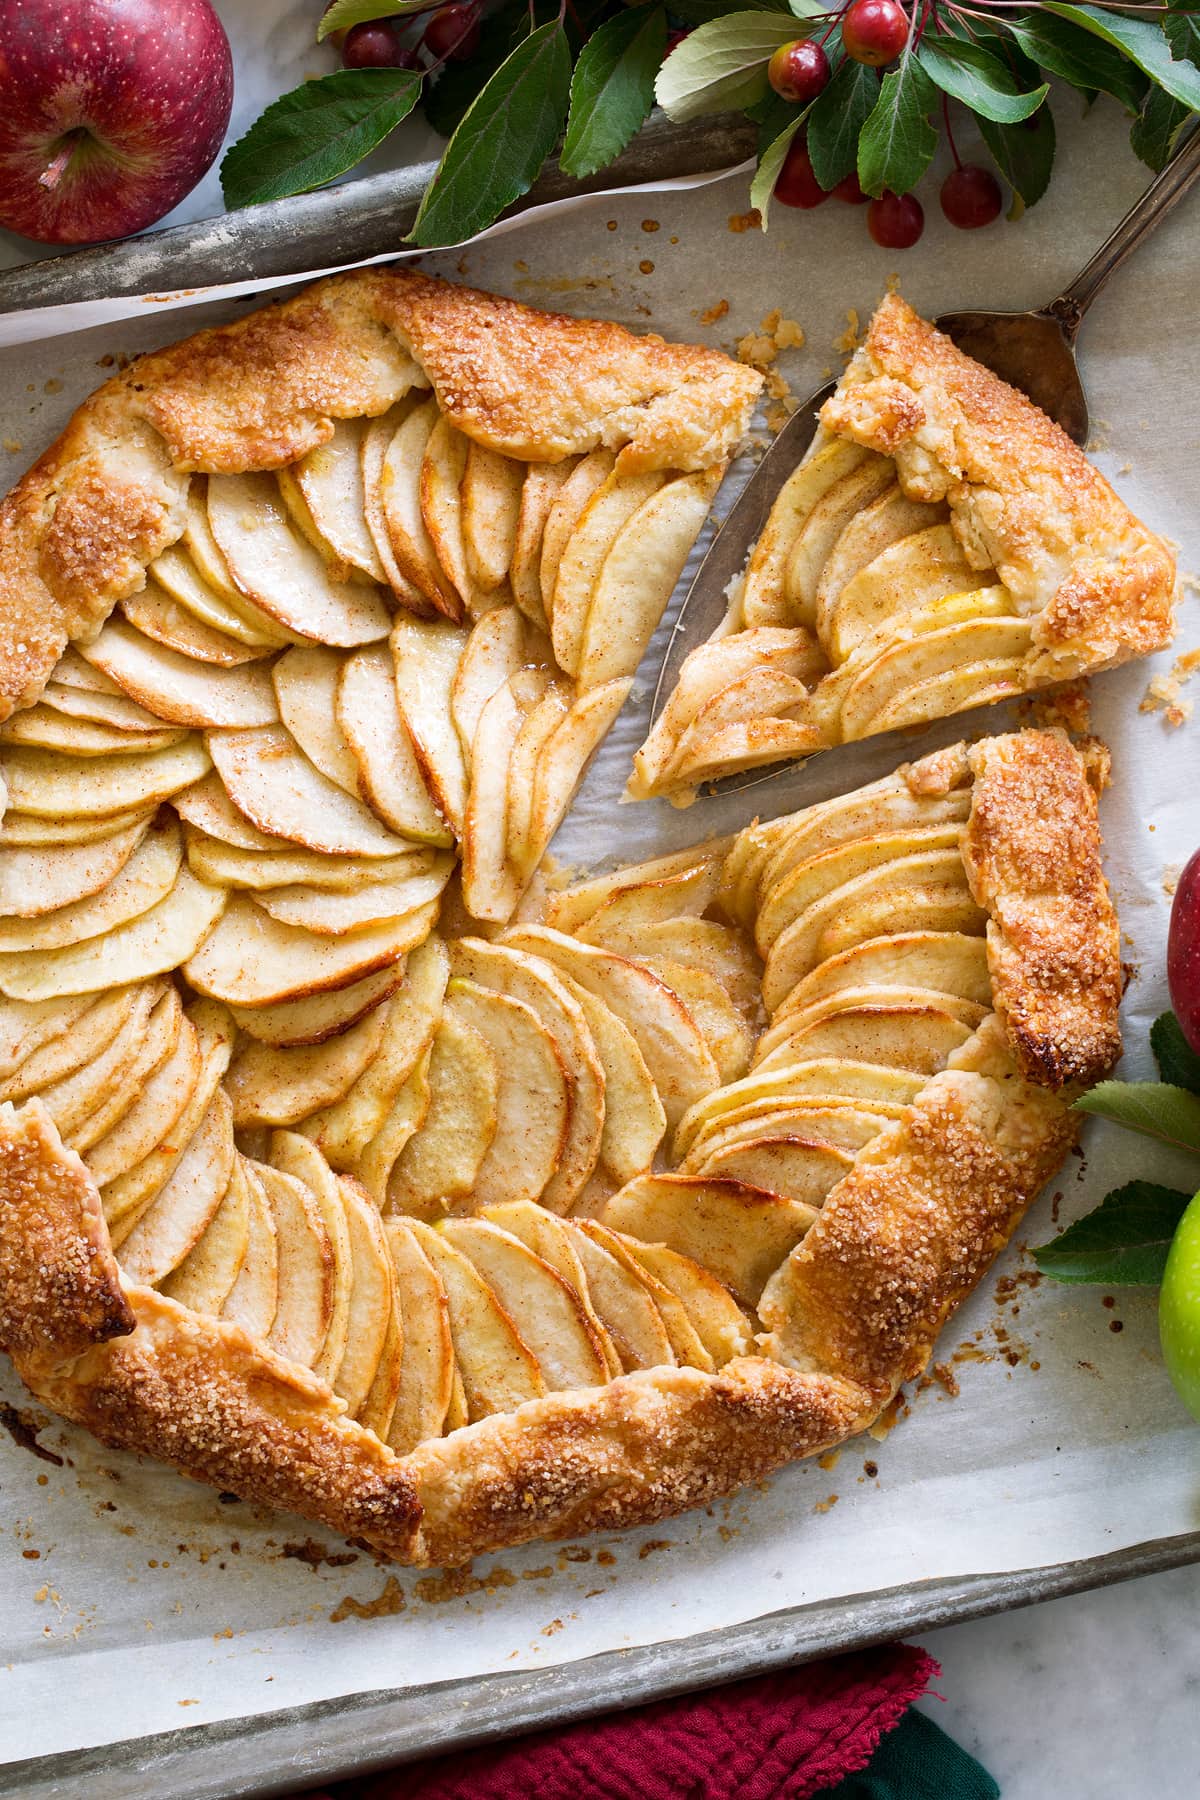 Apple Galette Recipe - Cooking Classy